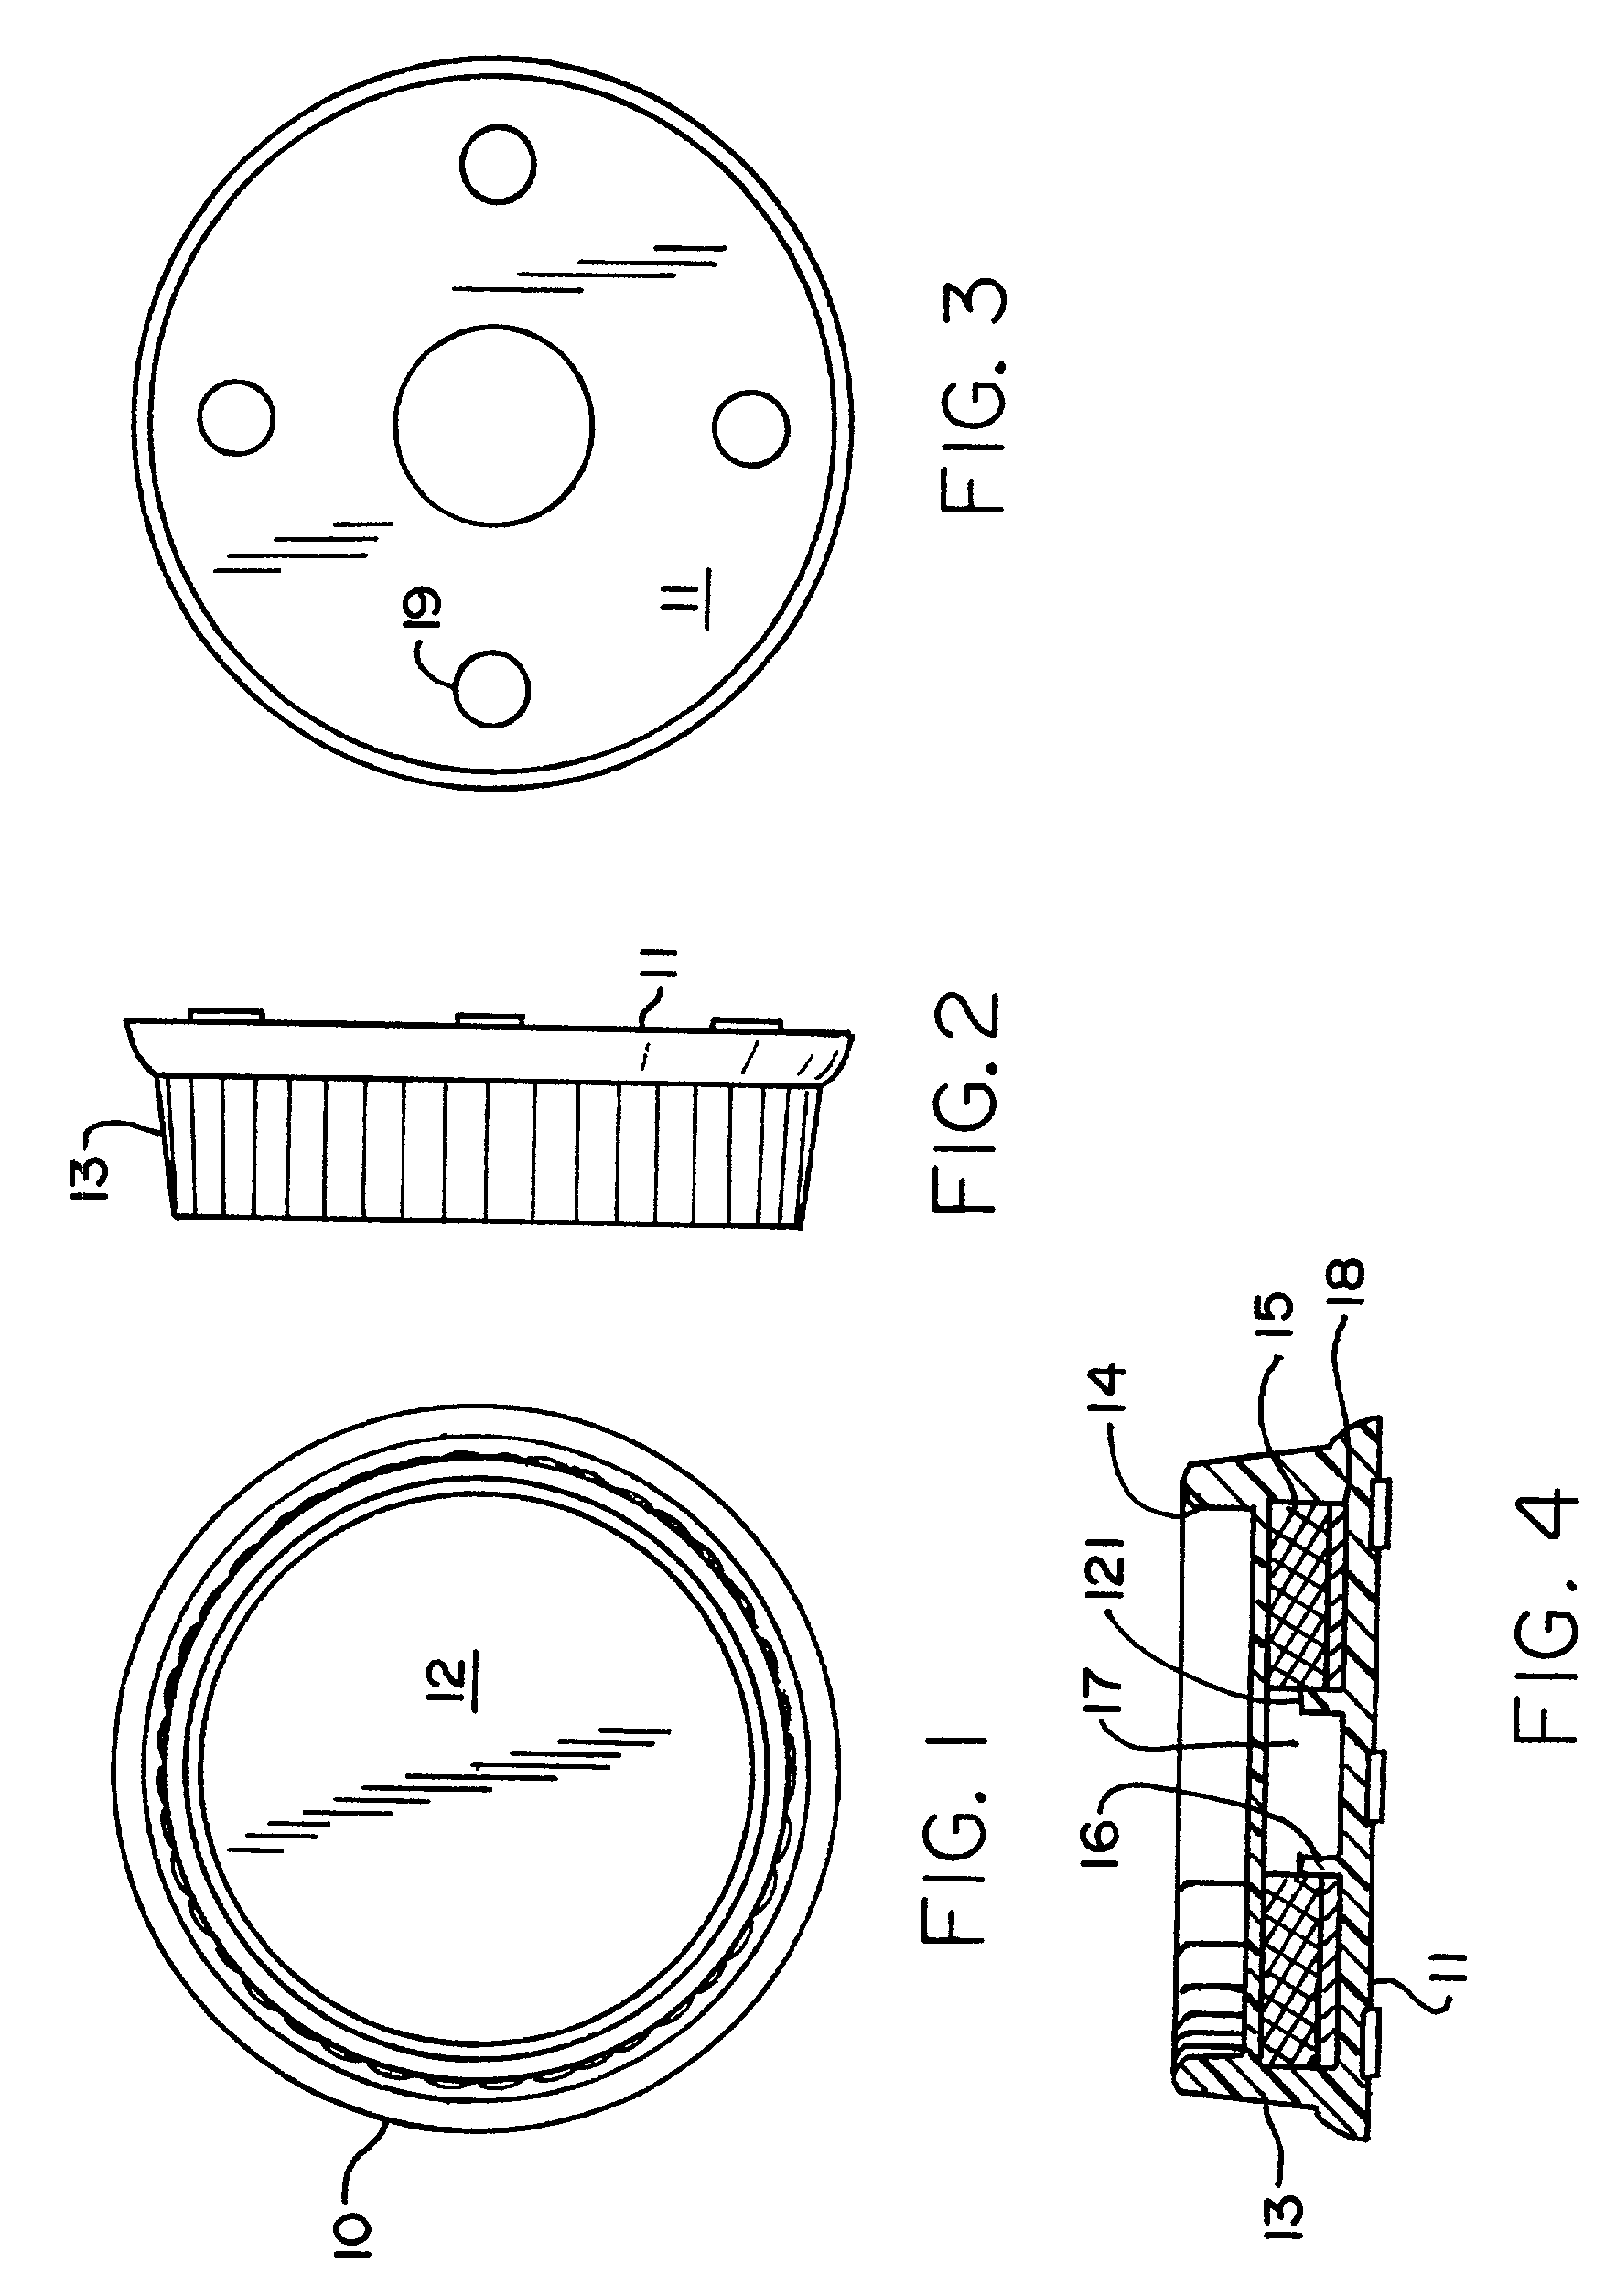 Apparatus for improving the taste of beverages